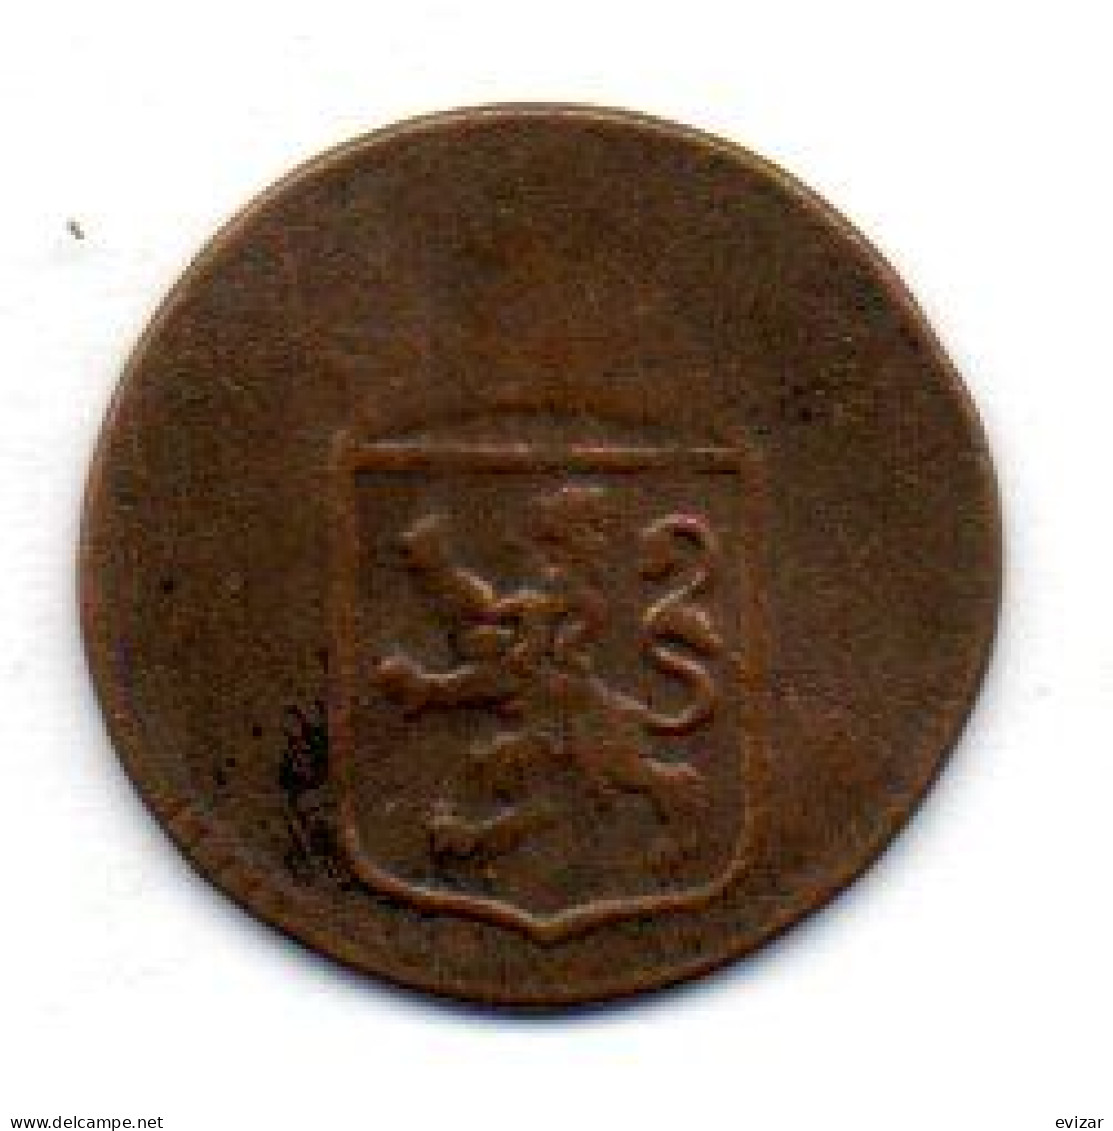 NETHERLAND INDONESIA - HOLLAND, 1 Duit, Copper, Year 1770, KM # 72 - Indonesia